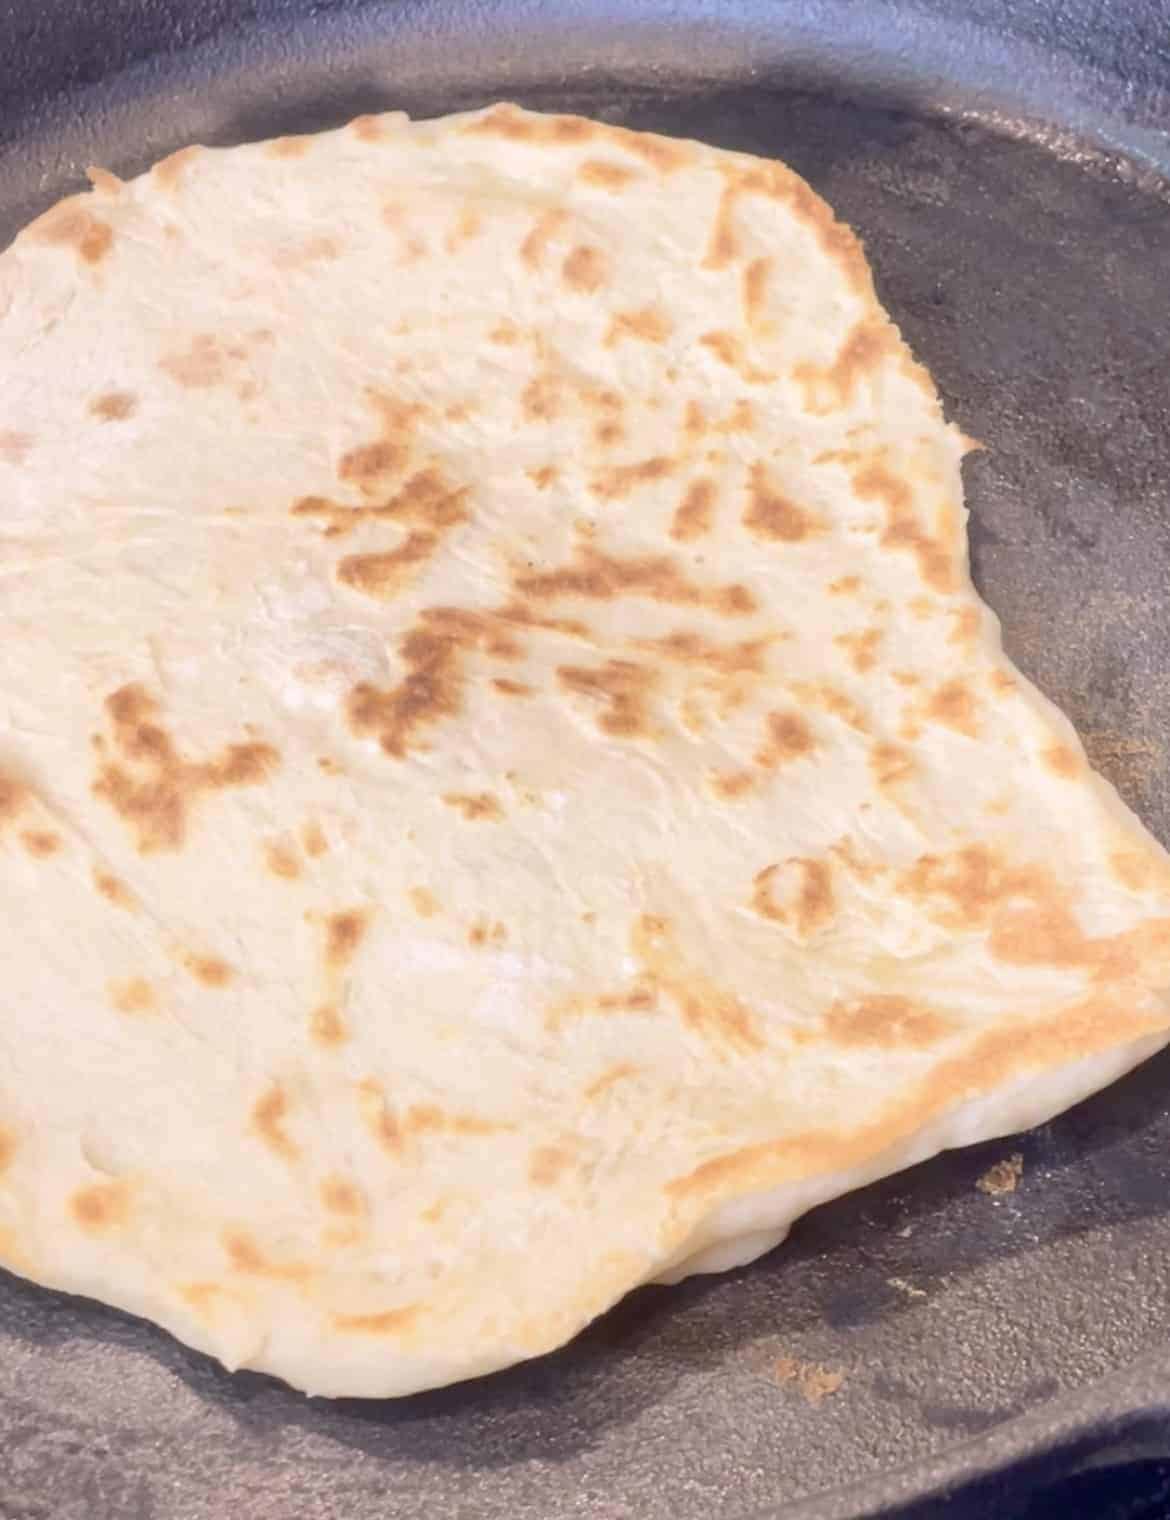 An easy-to-make skillet flatbread recipe, soft and flavorful bread perfect for any meal or snack.